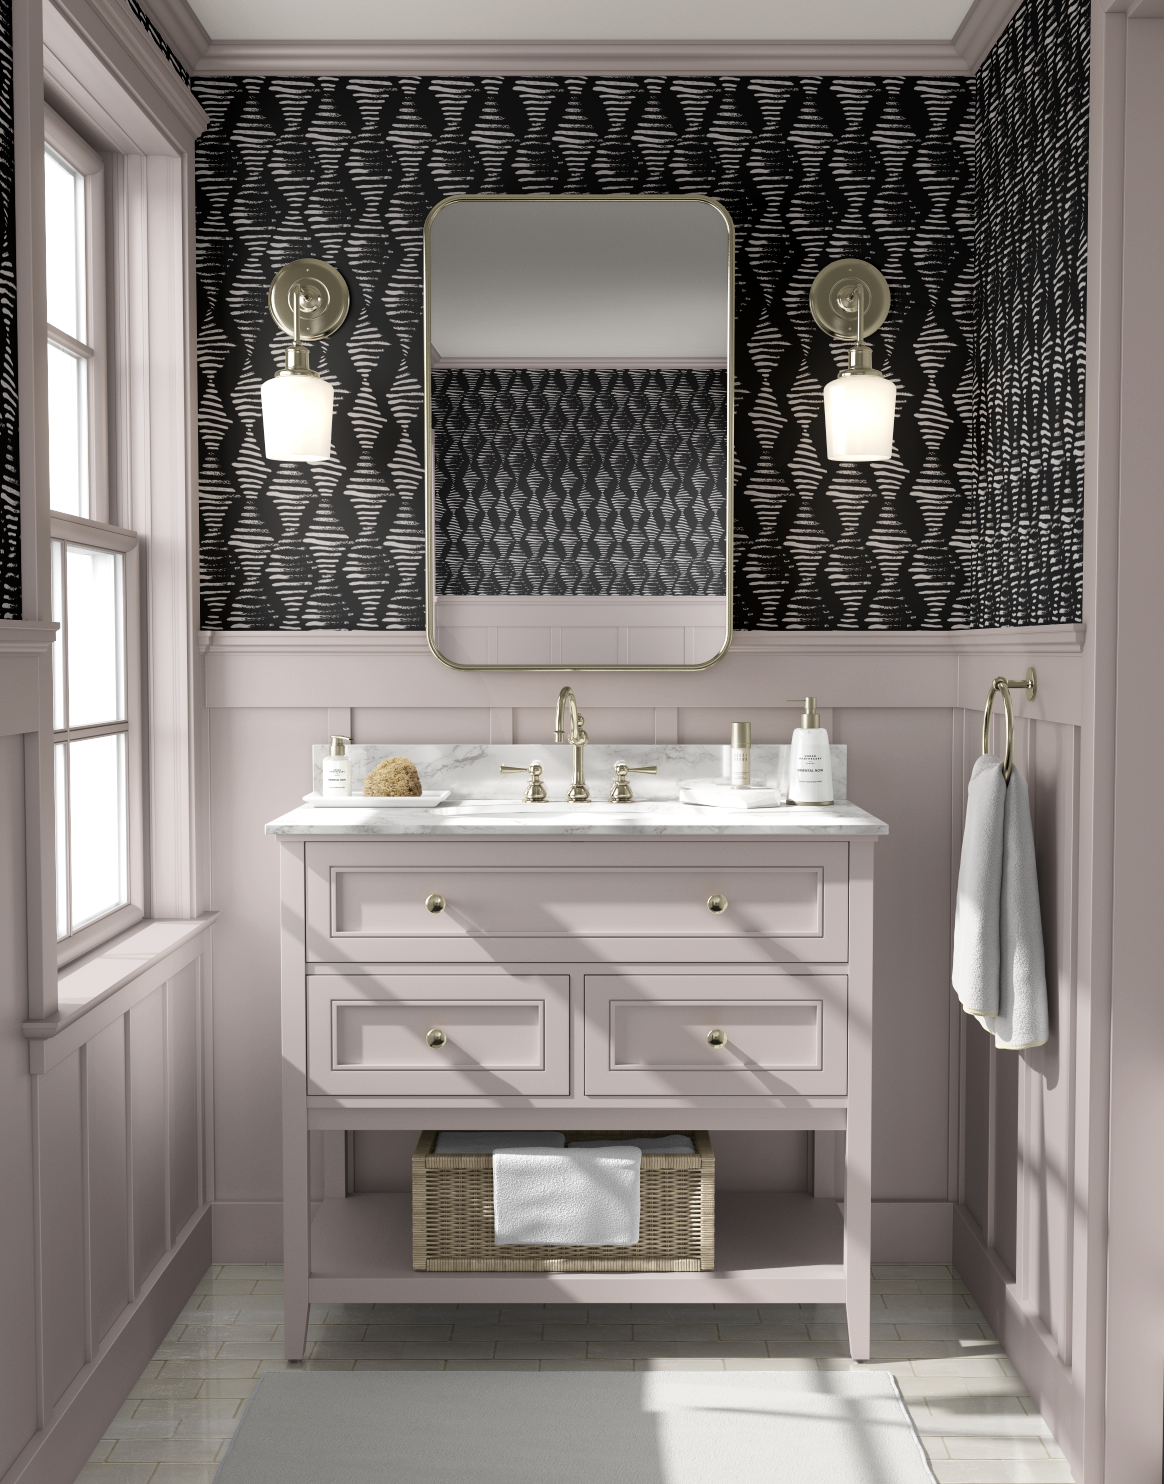 Yes You Can Use Wallpaper in the BathroomHeres How